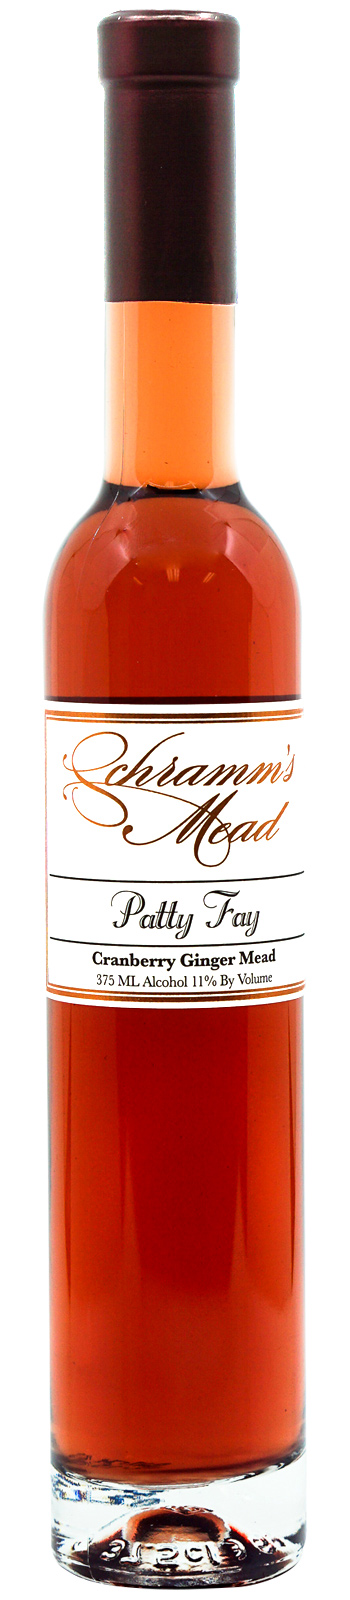 Patty Fay - Cranberry Ginger Mead - 375 ML Alcohol 11% By Volume